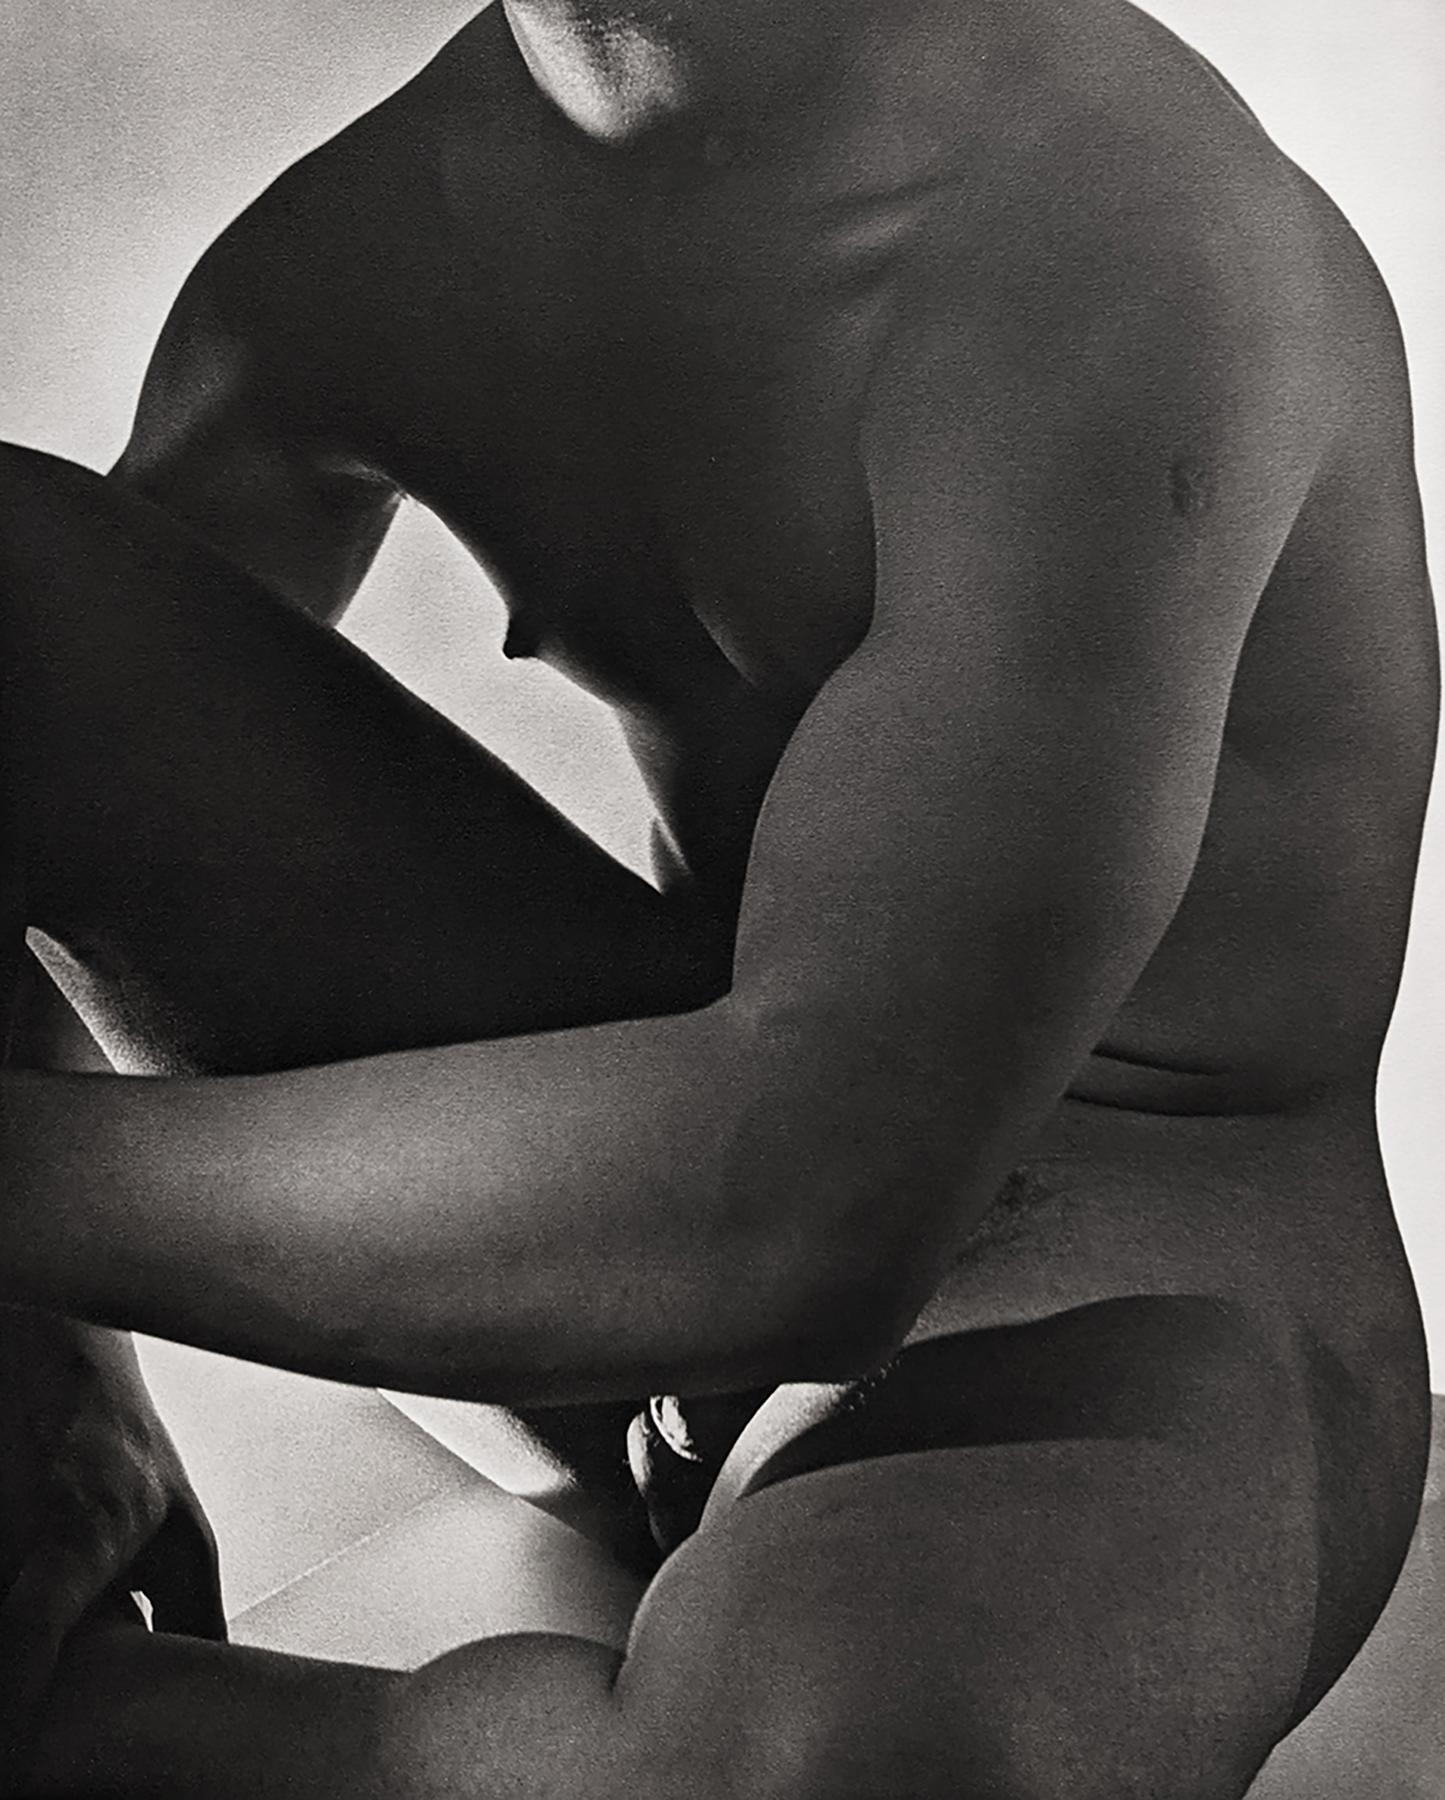 Horst P. Horst Black and White Photograph - Male Nude (Frontal)